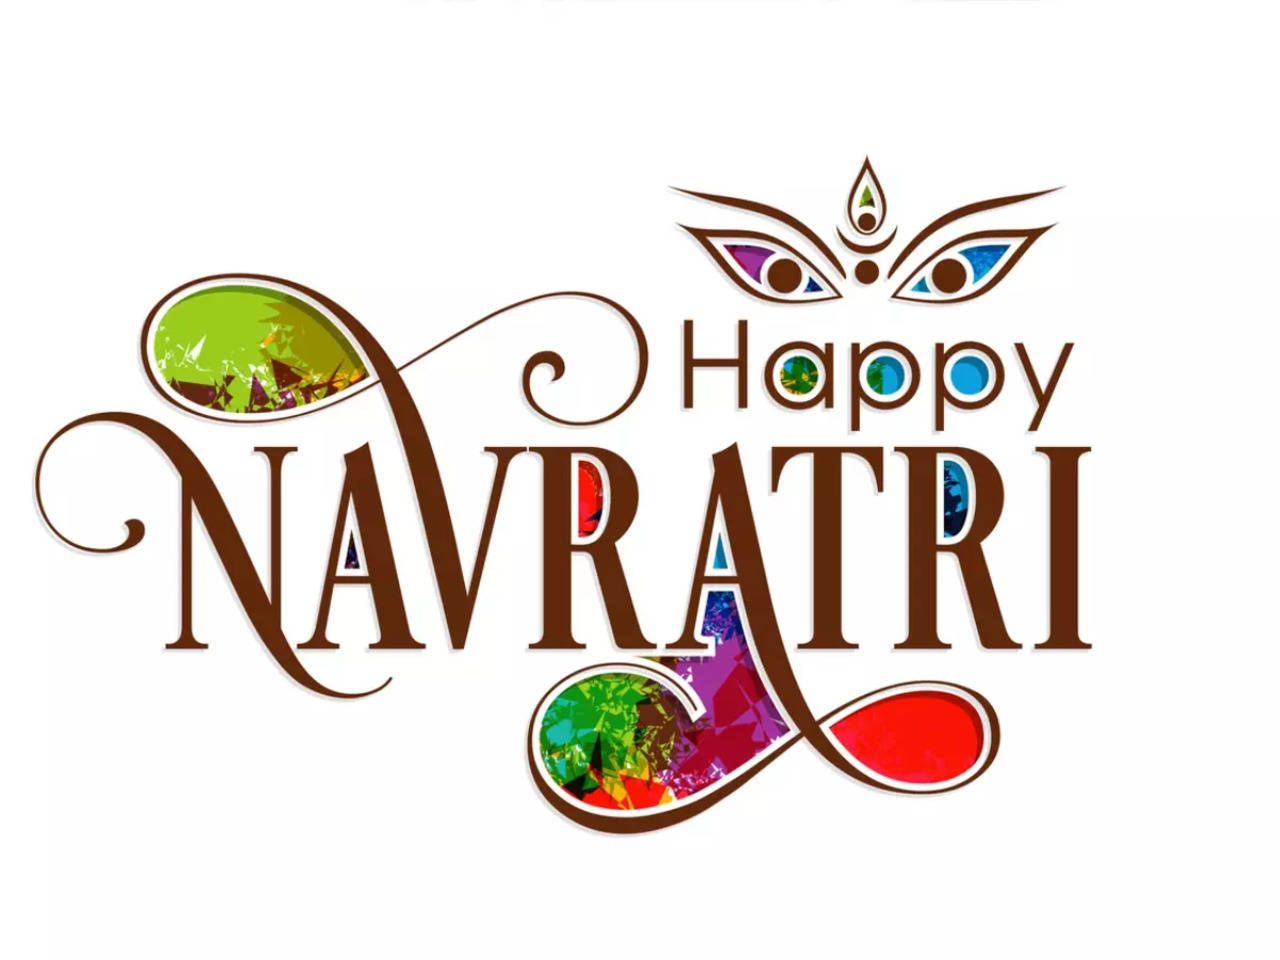 Happy Navratri 2019 Wishes Images, Quotes, Status, HD Wallpaper Download,  Messages, SMS, Photos, GIF Pics, Pictures, and Greetings